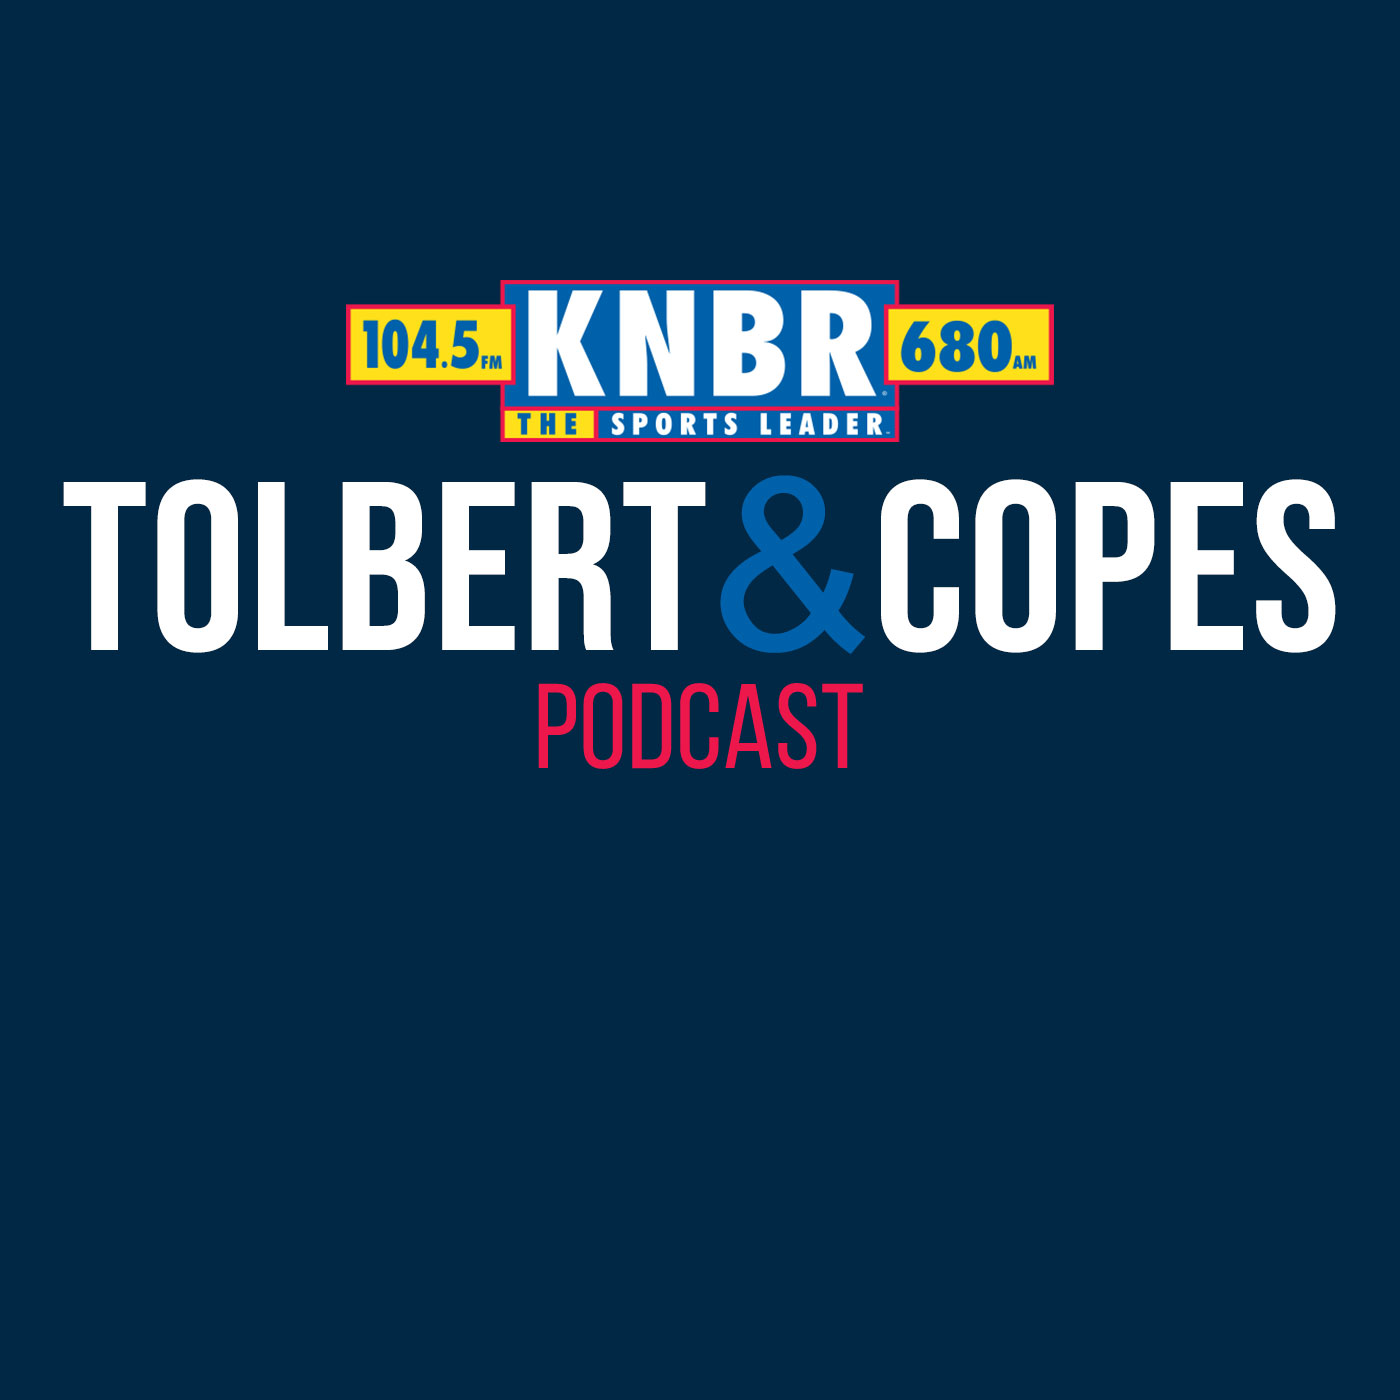 7-22 Jim Bowden joins Tolbert & Copes and believes Farhan & the Giants can't be sellers at the deadline